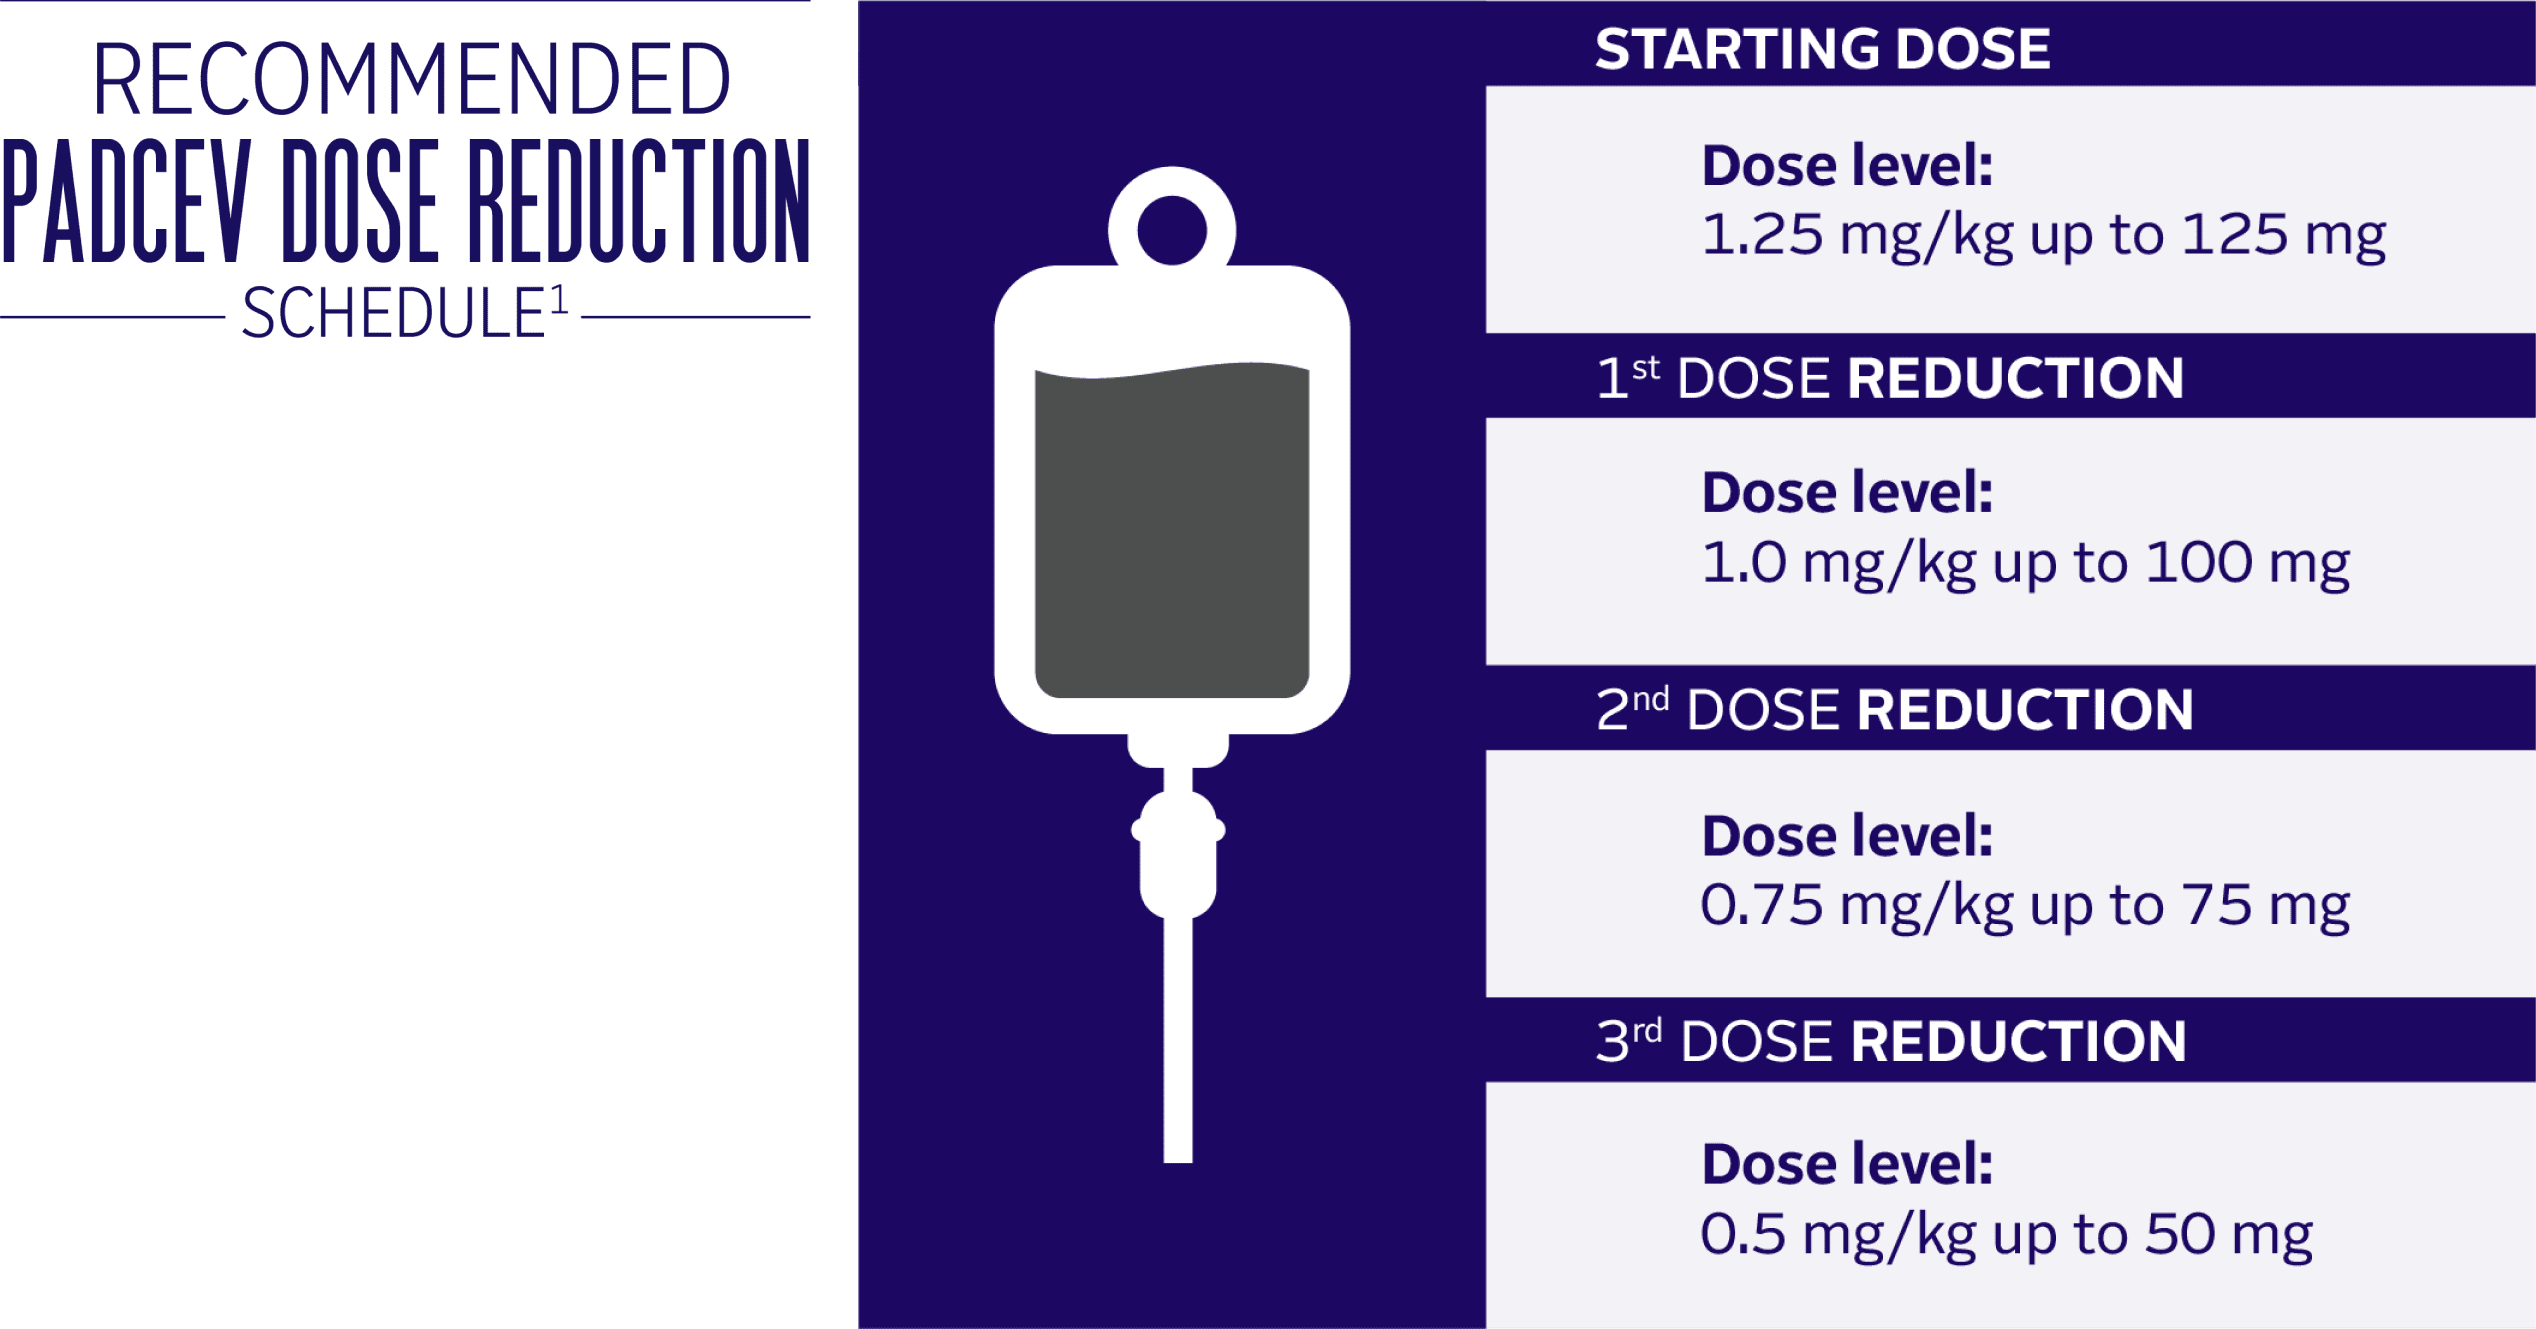 RECOMMENDED PADCEV DOSE REDUCTION SCHEDULE1. STARTING DOSE: Dose level: 1.25 mg/kg up to 125 mg. 1st DOSE REDUCTION: Dose level: 1.0 mg/kg up to 100 mg. 2nd DOSE REDUCTION: Dose level: 0.75 mg/kg up to 75 mg. 3rd DOSE REDUCTION: Dose level: 0.5 mg/kg up to 50 mg.